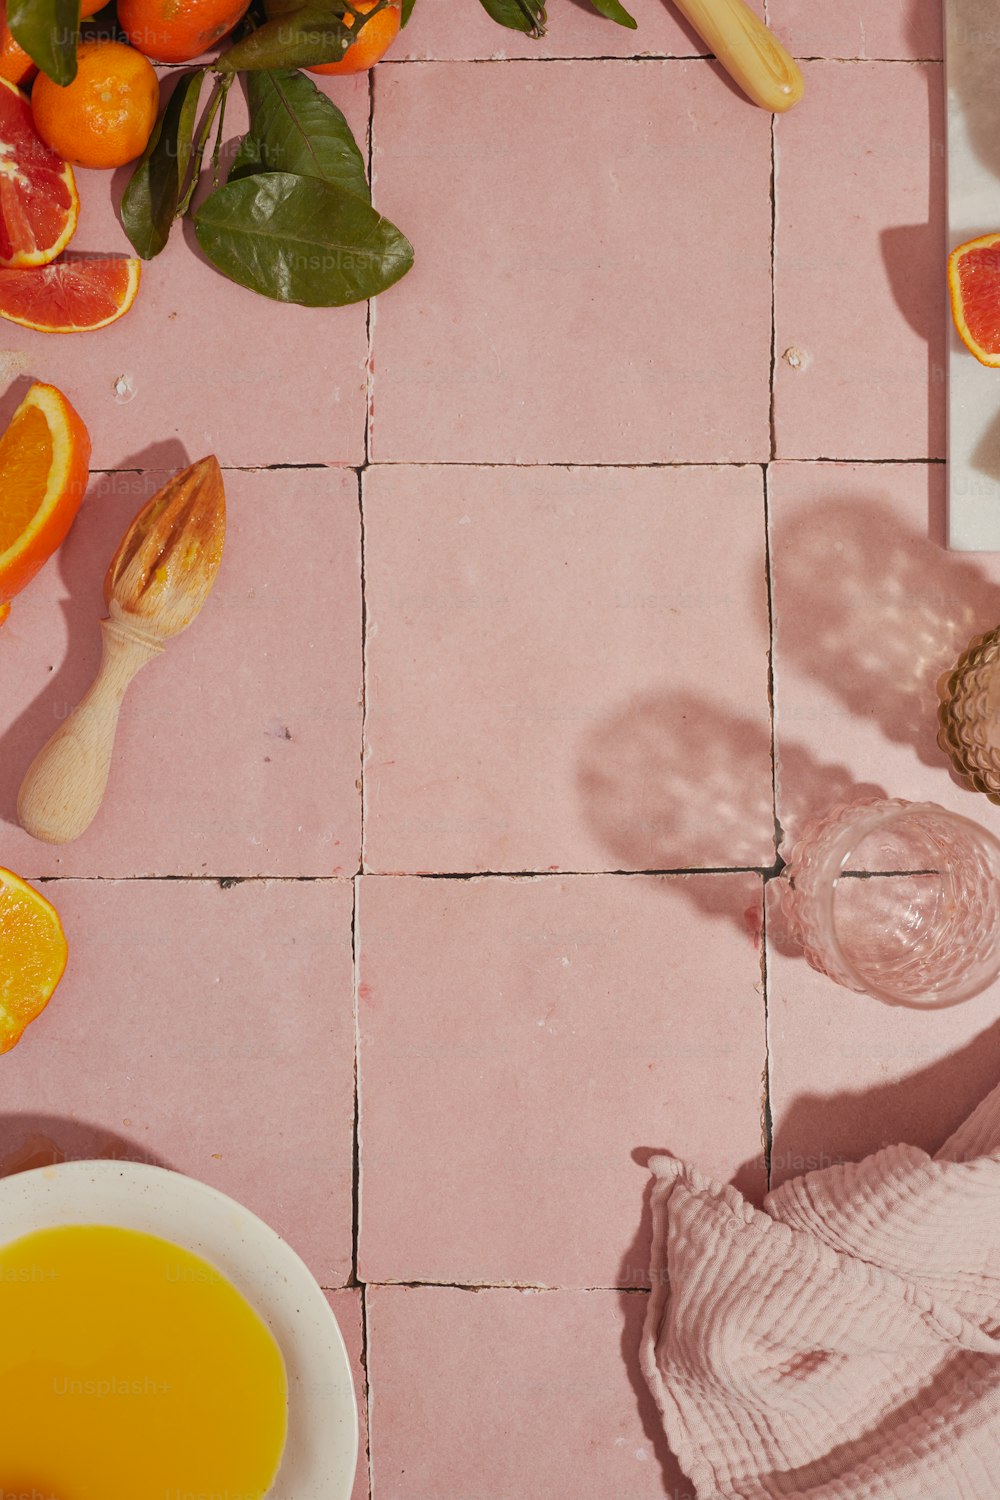 a pink tiled floor with oranges and other fruits